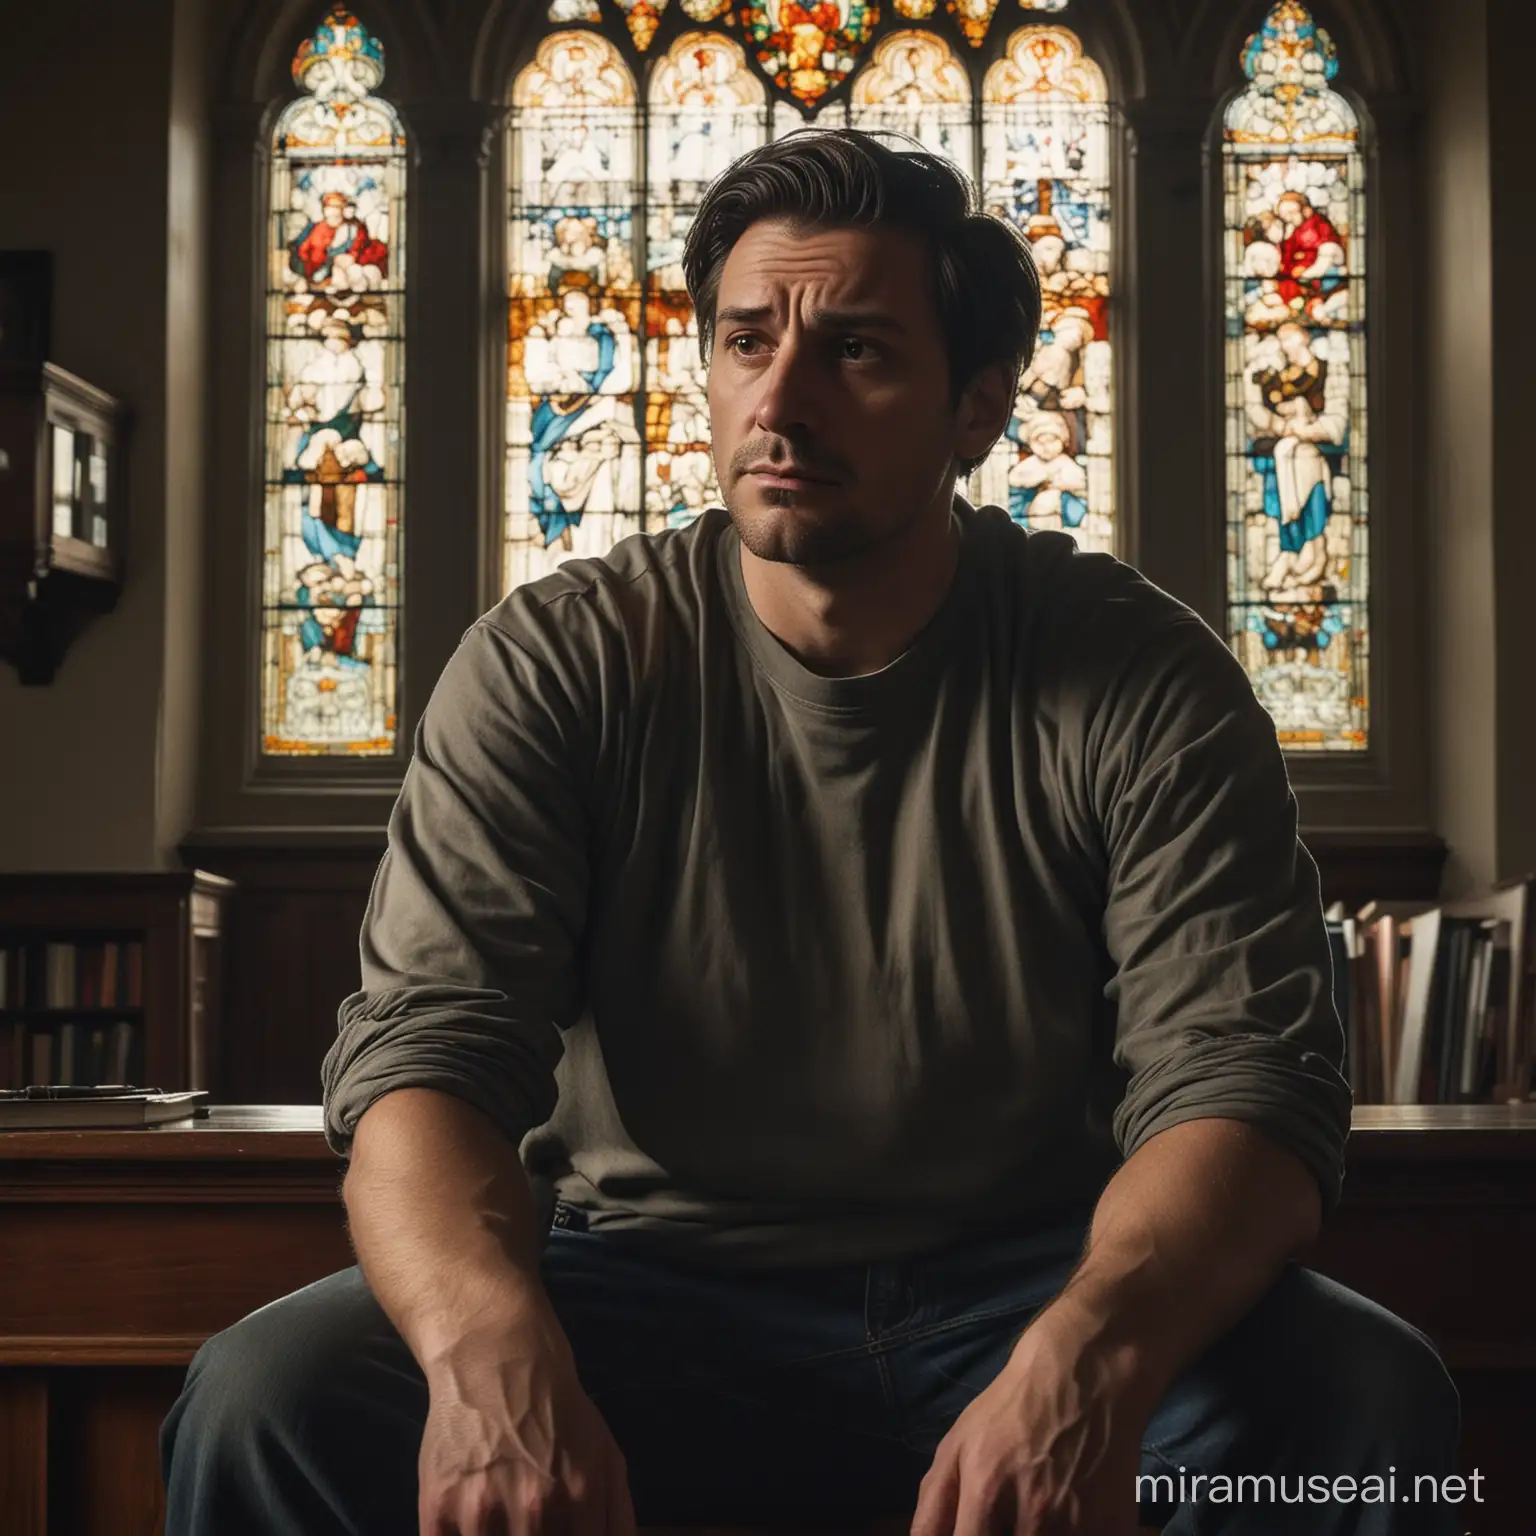 Create a visually striking artwork depicting a dark, somber scene of a tall, broad, and stocky 50-year-old man seated in a dimly lit church library, surrounded by traditional stained glass windows. The man should have black hair, broad shoulders, and an overweight stature with a round belly. He is casually dressed in cargo shorts, a collared t-shirt, sneakers, and socks. His expression is stern and brooding, with small eyes, a large nose, and big ears. His hazel eyes pierce through the darkness, conveying a fierce and intimidating aura. The man's face is rounded with a double chin, sporting a traditional haircut with a side part, with hair on both his arms and legs and a short beard covering his chin and both sides of his face. The overall color palette should be dark, emphasizing shadows and contrast. The man is depicted alone, absorbed in his thoughts, and staring intensely into the distance, adding depth and emotion to the composition while exuding an intimidating and daunting presence. The artwork should capture the imposing nature of the man, evoking a sense of power and authority within the atmospheric setting of the church library.